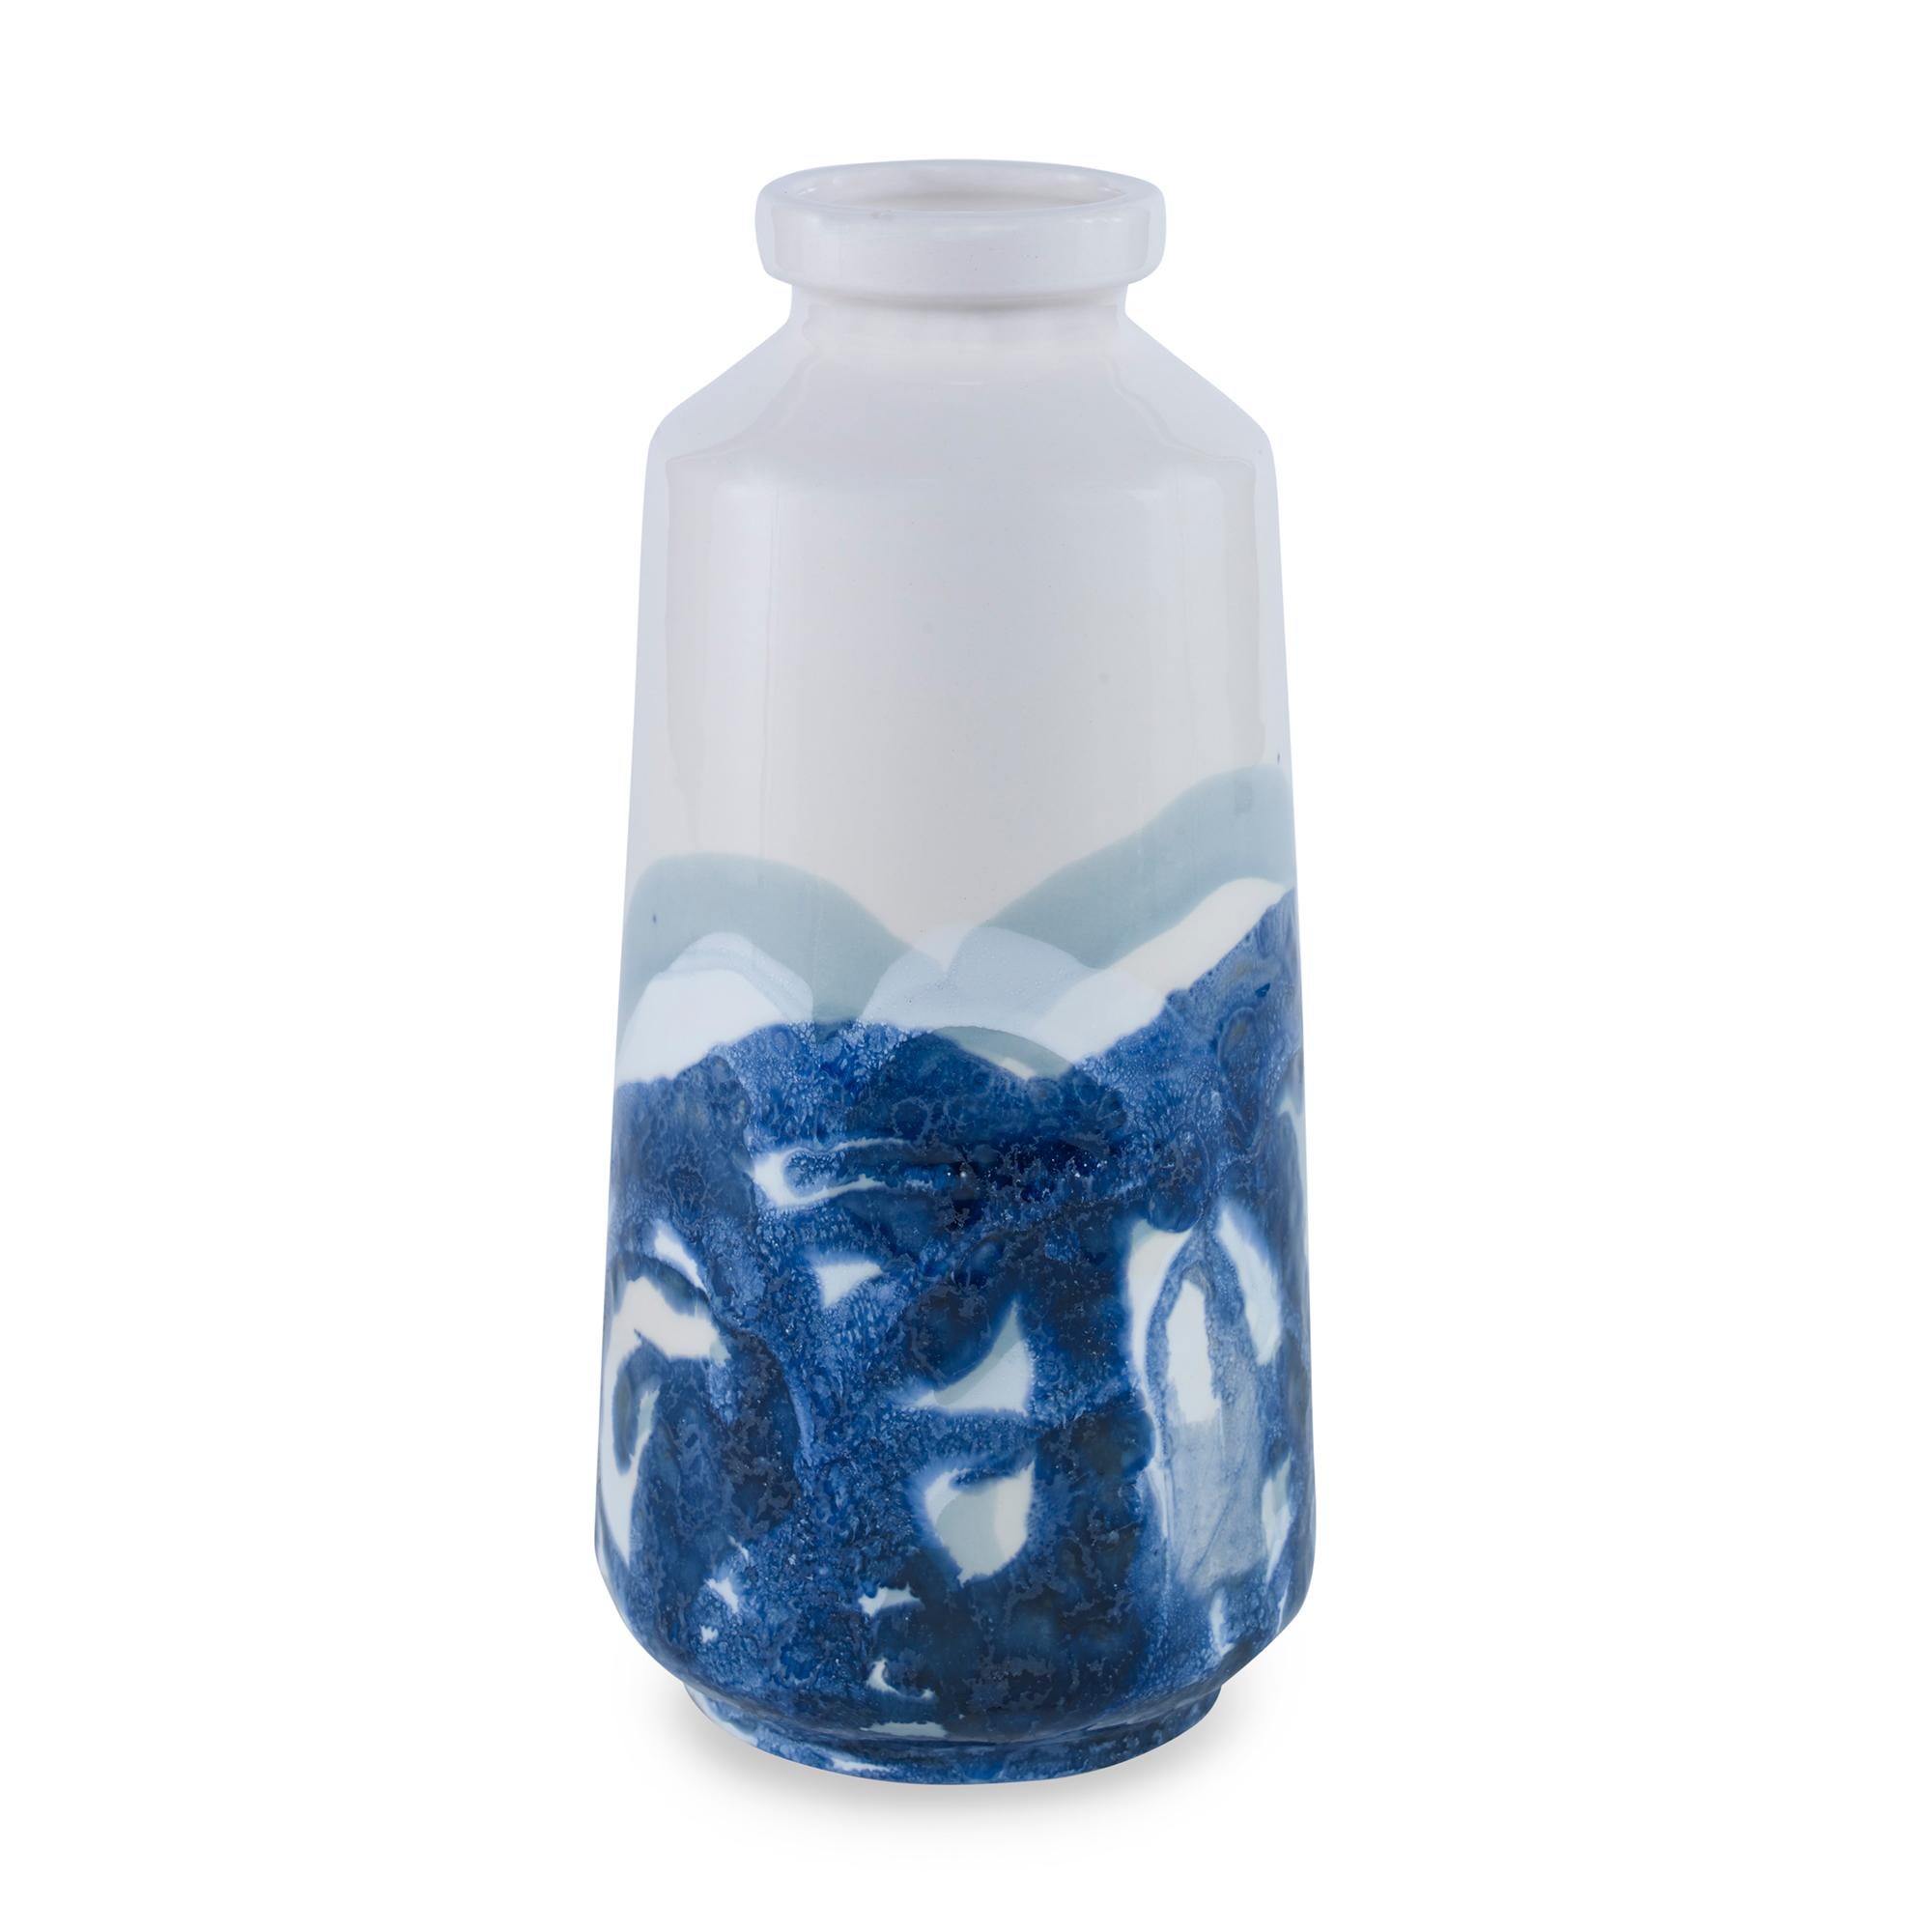 A hand painted, earthenware bottle pot with a reactive blue glaze. Due to the handmade nature of this product, variation is to be expected from piece to piece.
 